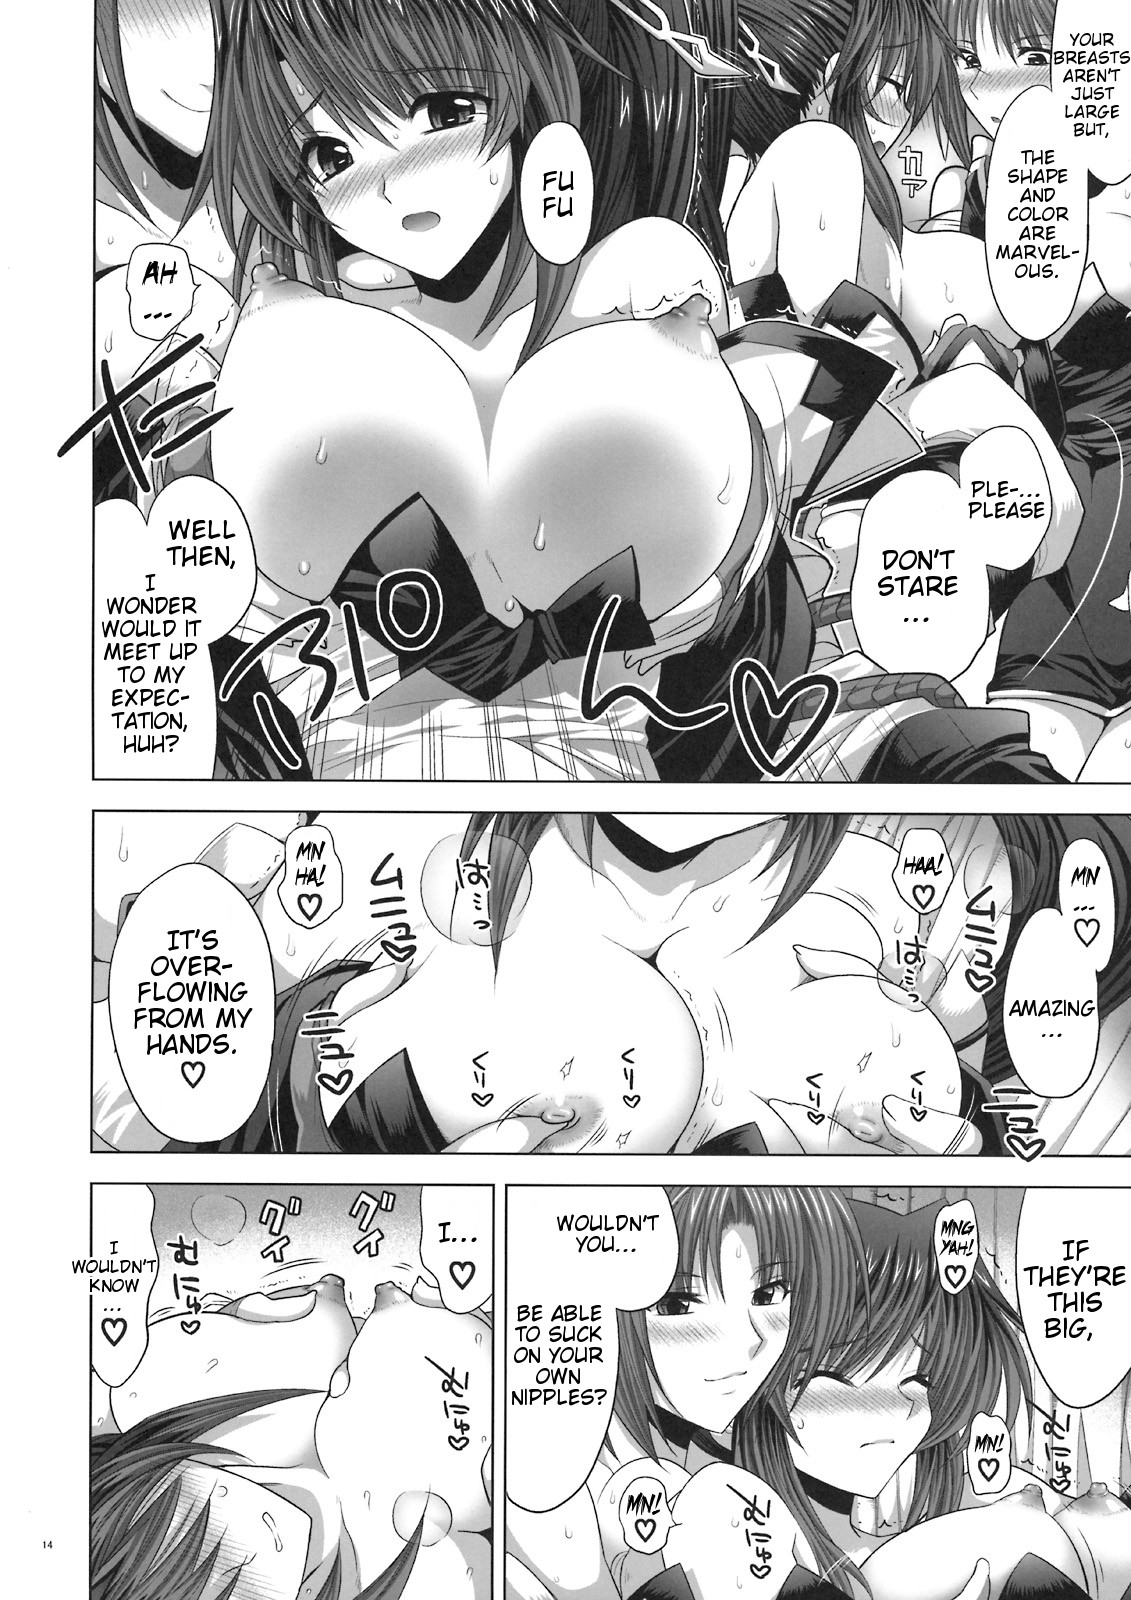 [FANTASY WIND] SUPExFRO (SRW & Endless Frontier)[Eng] page 14 full